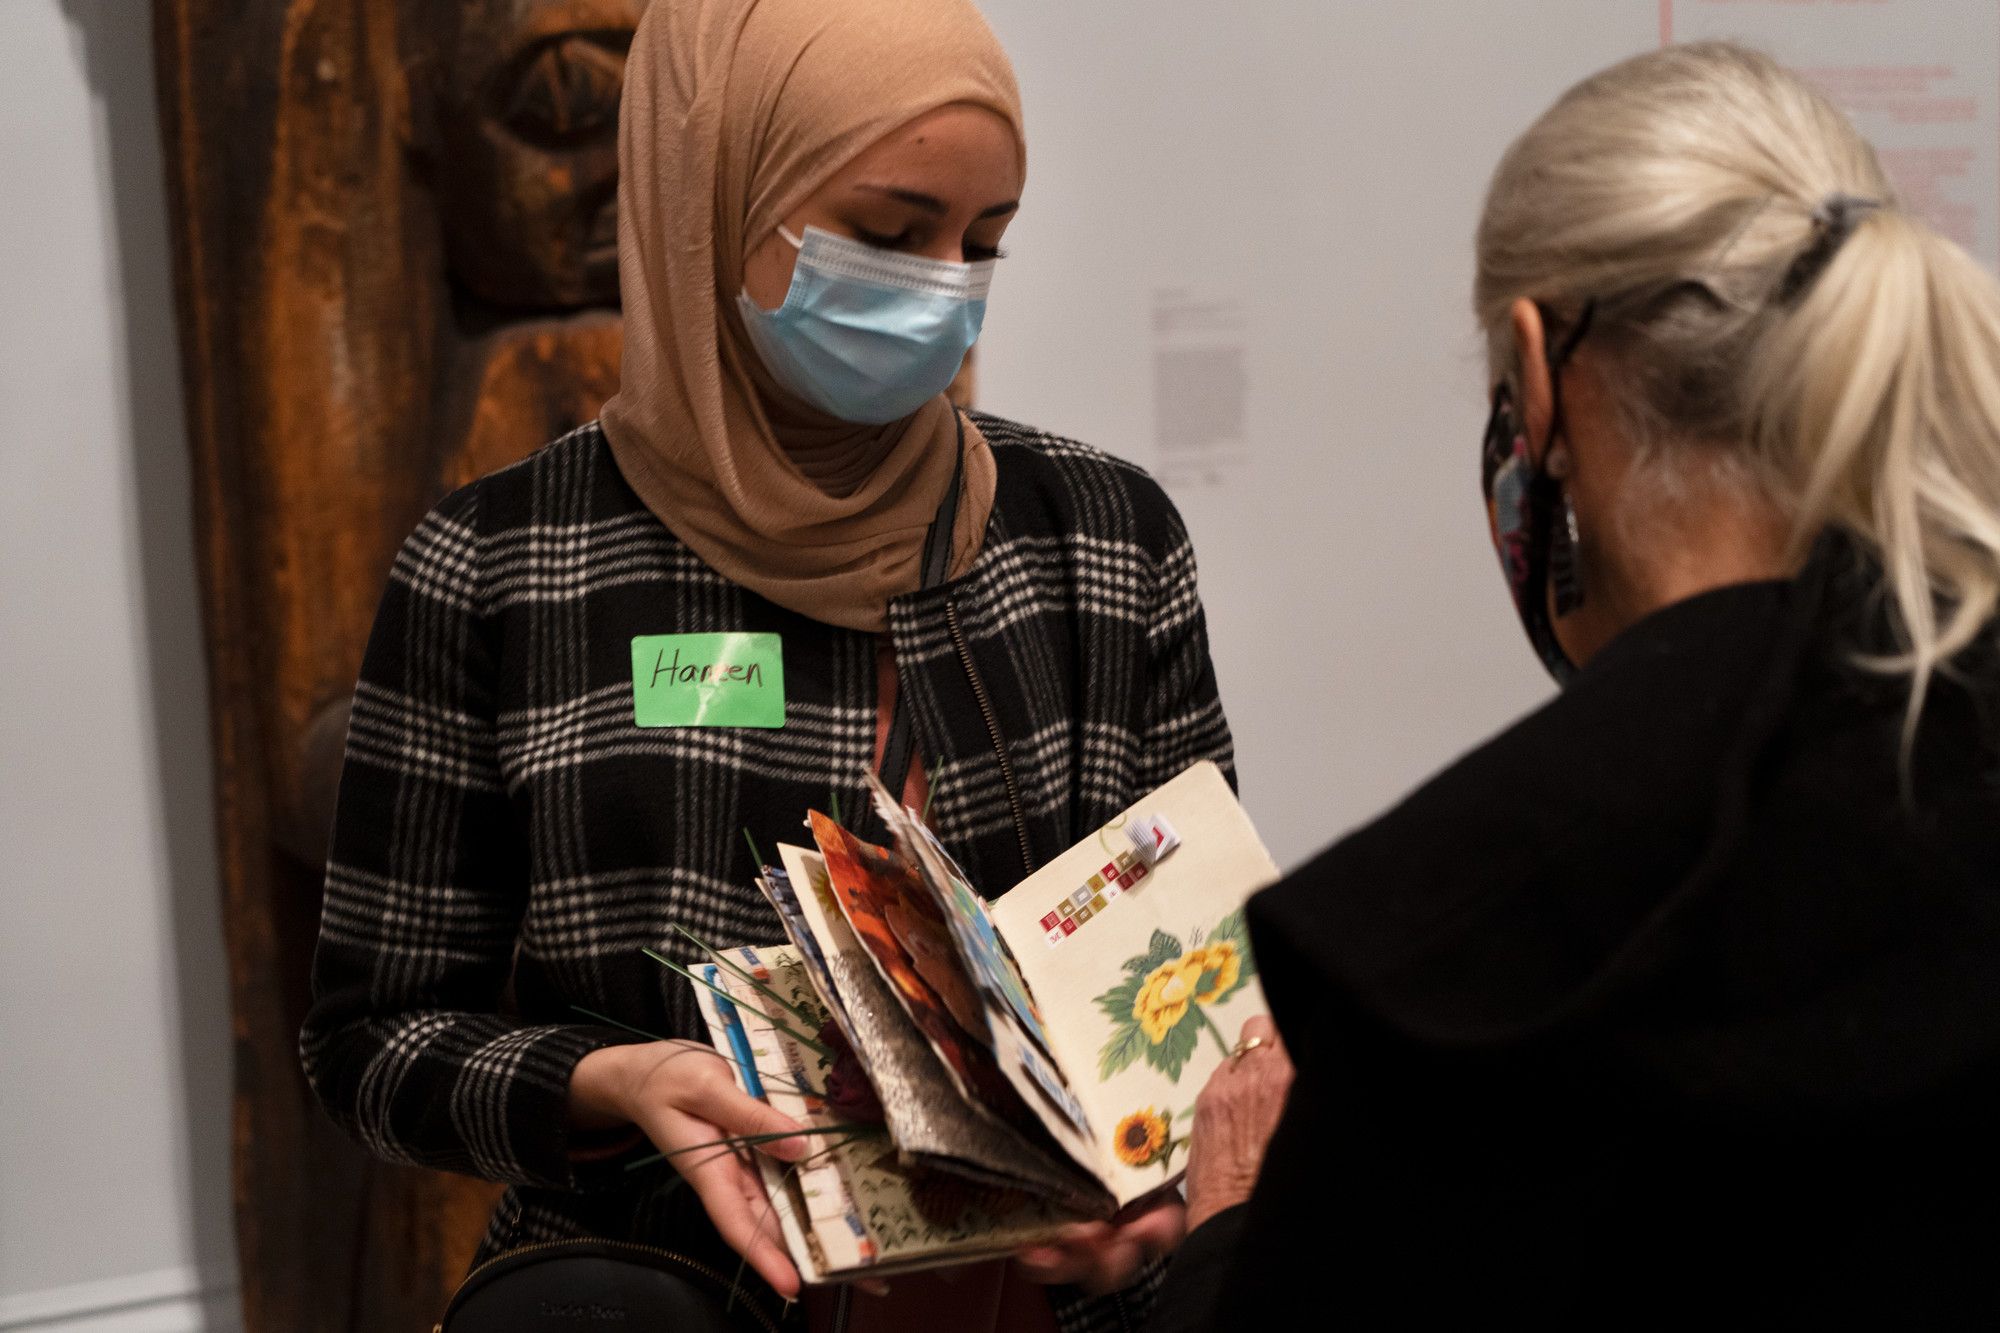 <p>A participant in a Museum program shows their book project to another person.</p>